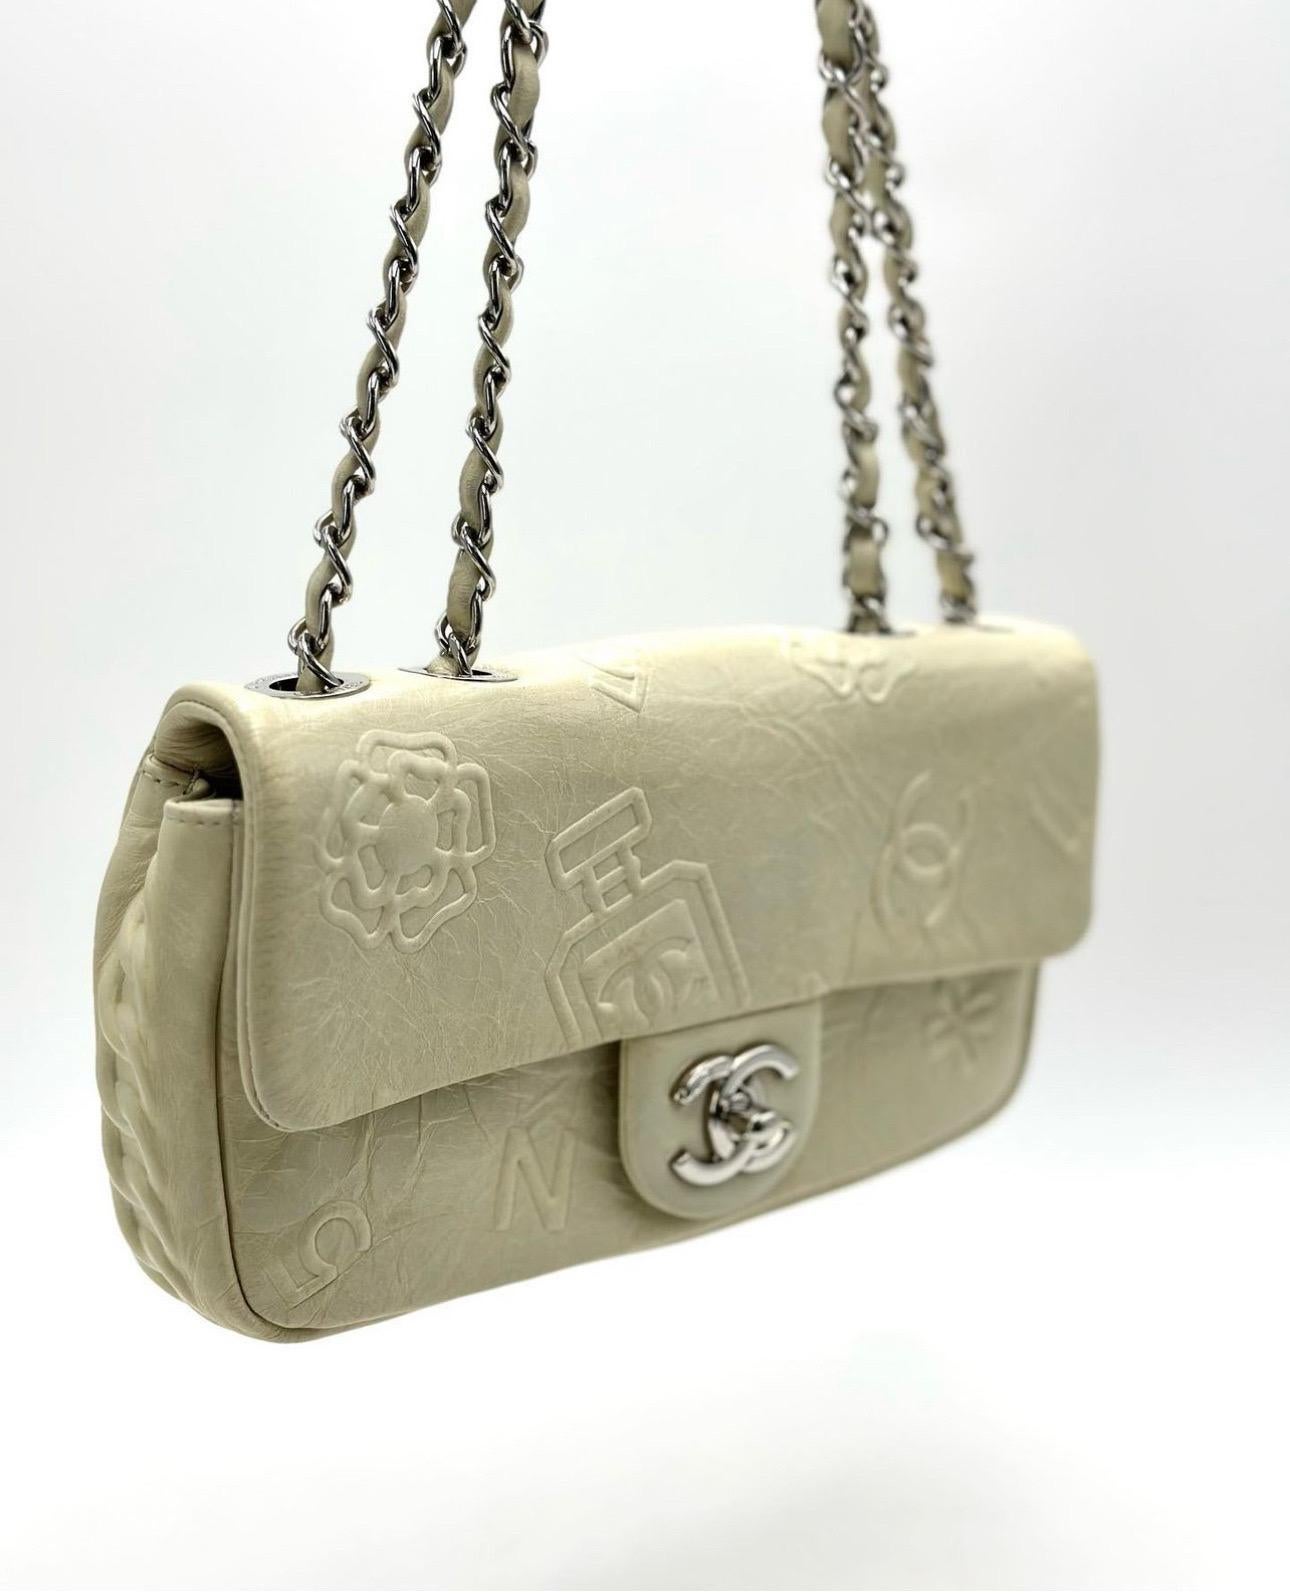 Chanel White Embossed Leather Precious Symbols Small Flap Bag For Sale 11